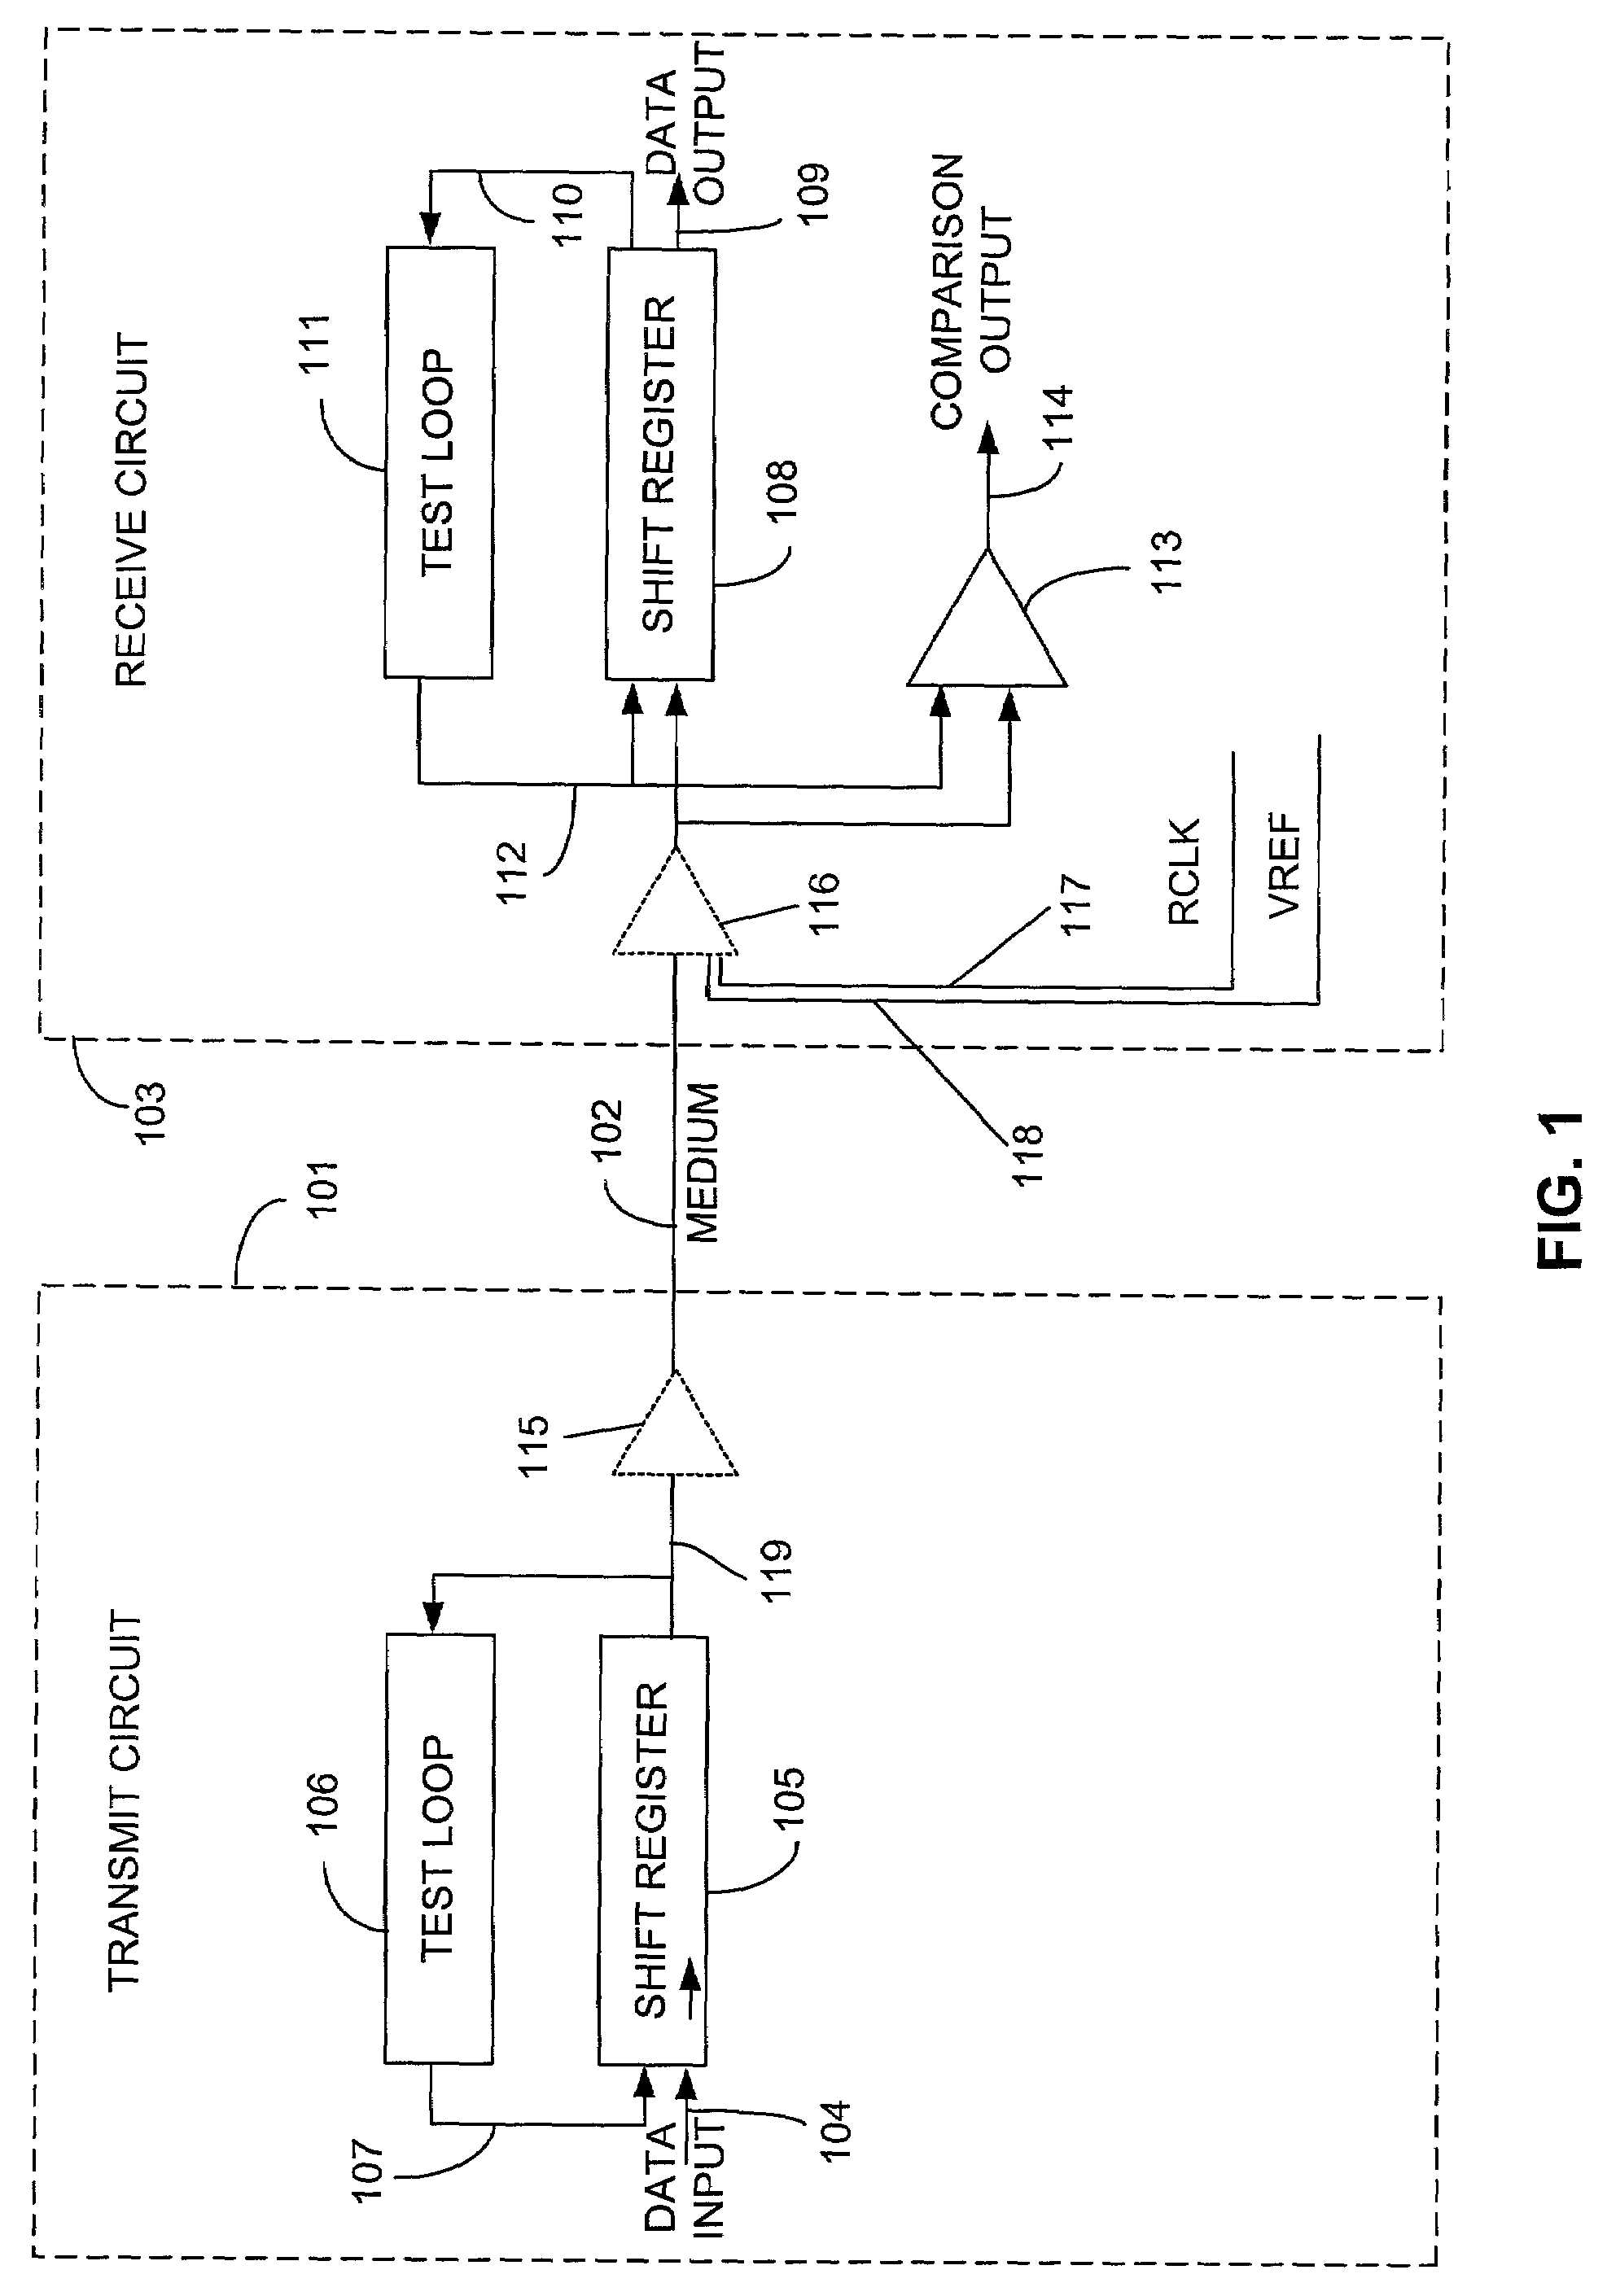 Method and apparatus for evaluating and optimizing a signaling system